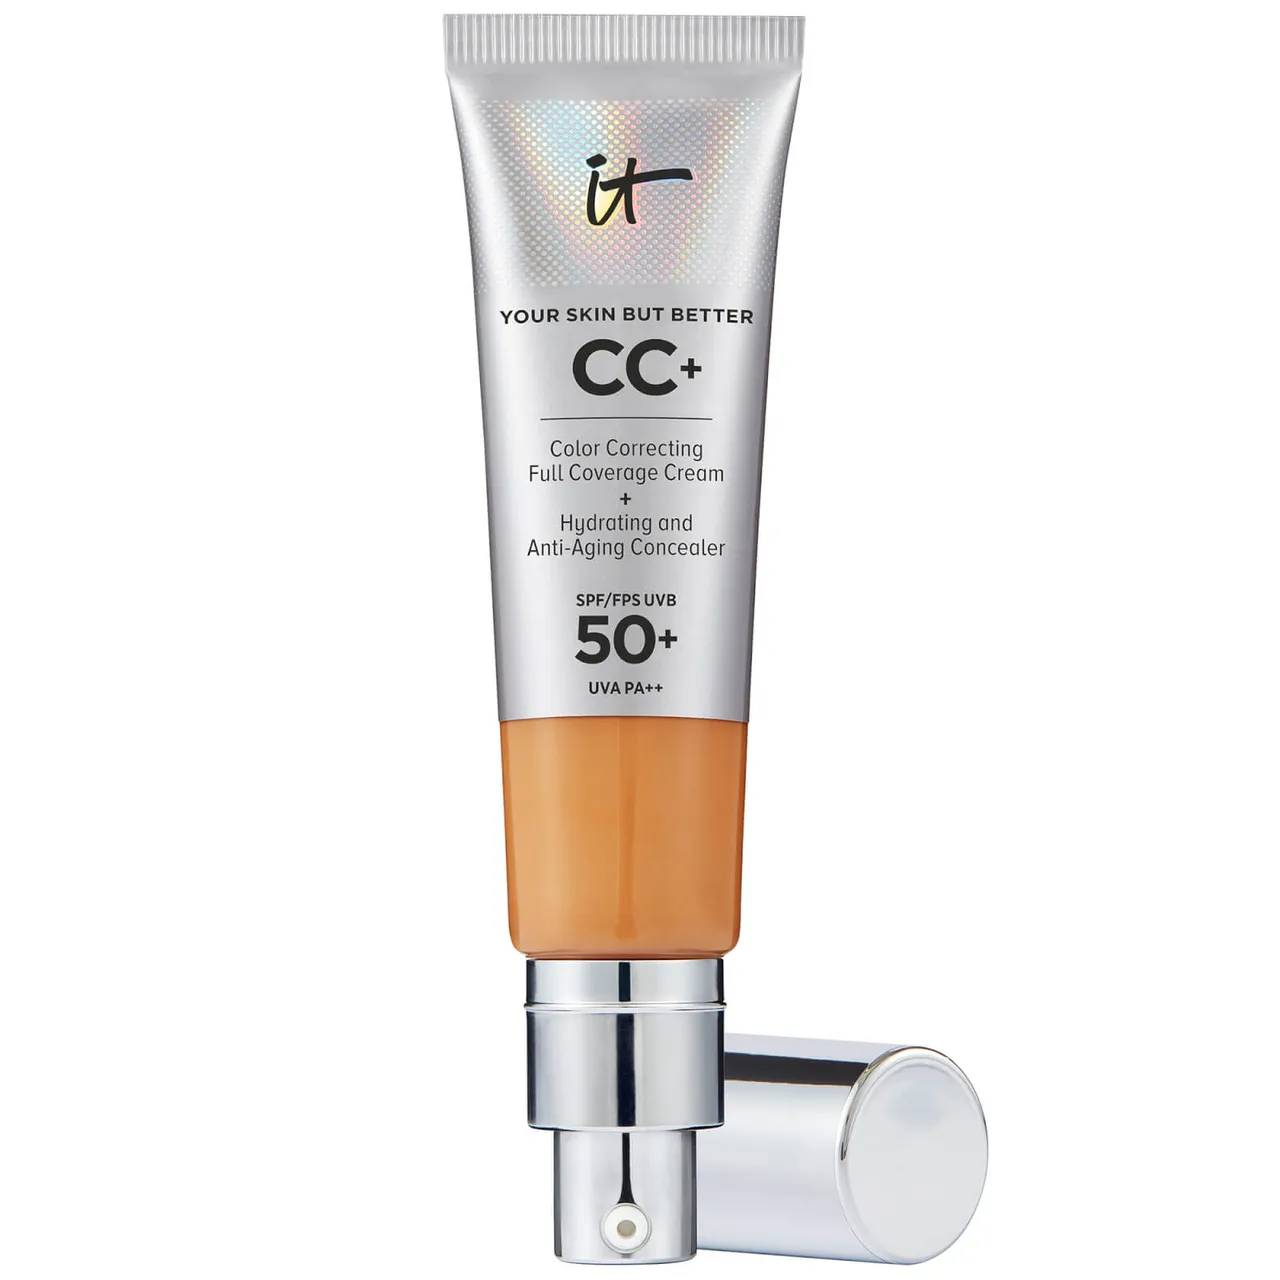 IT Cosmetics Your Skin But Better CC+ Cream with SPF50 32ml (Various Shades) - Tan